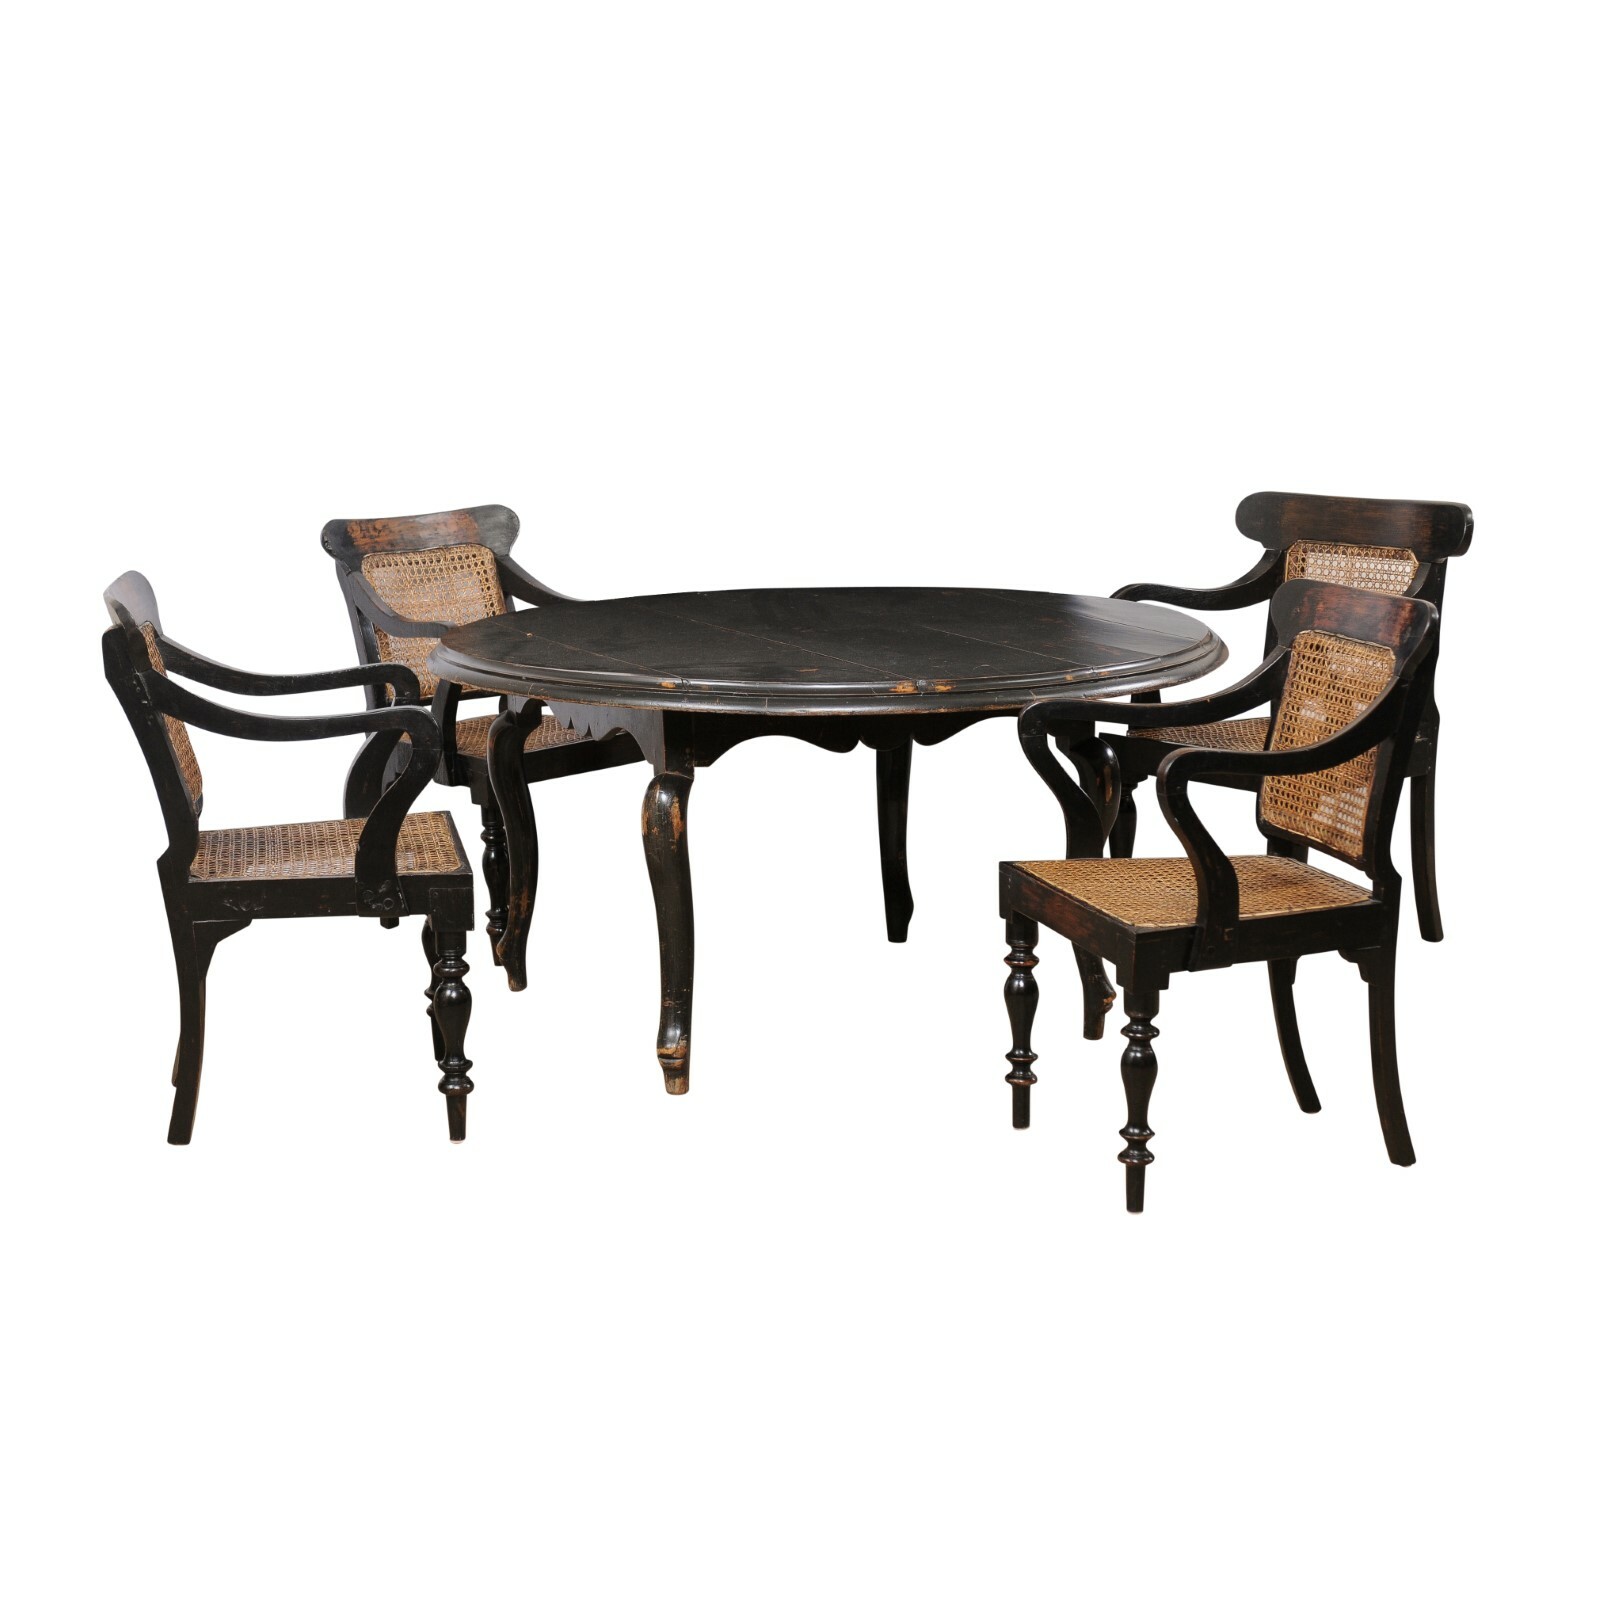 British Colonial Round Dining Set for Four